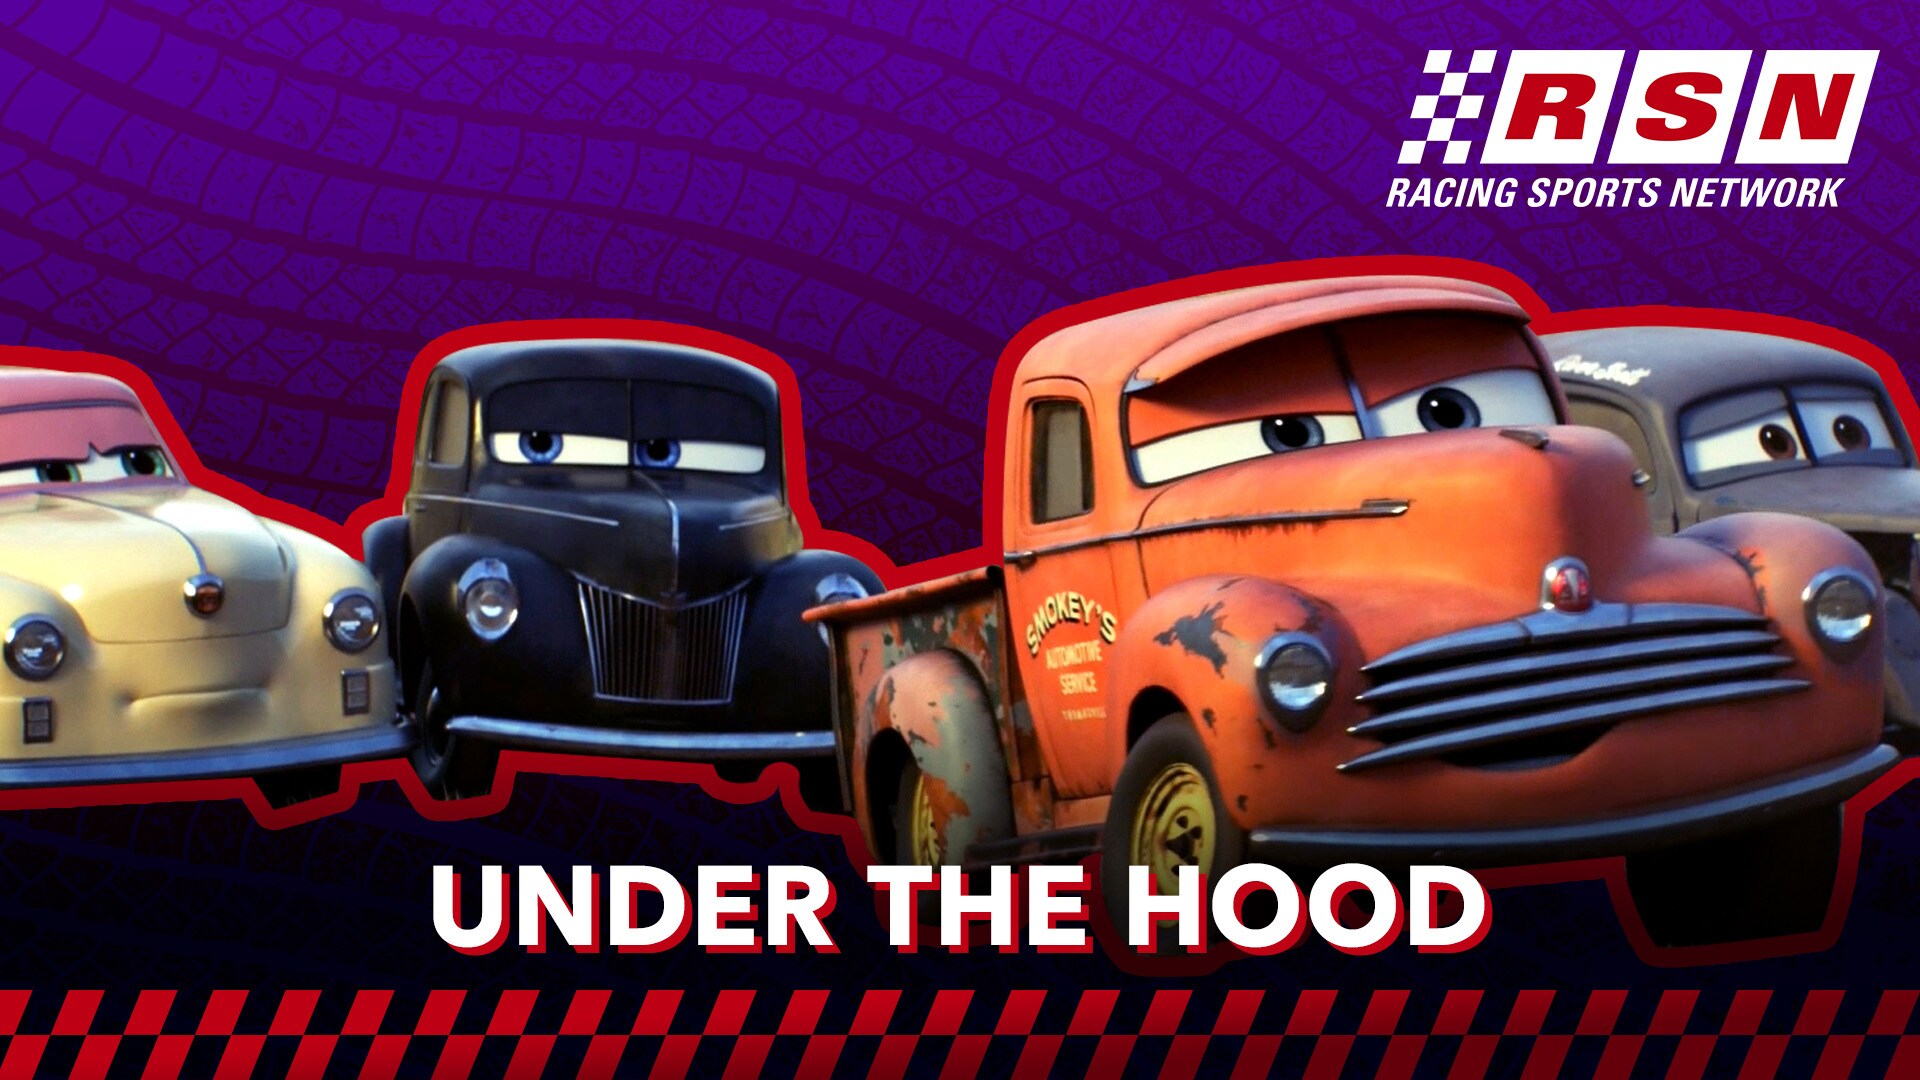 Under the Hood: Race and Chase Together